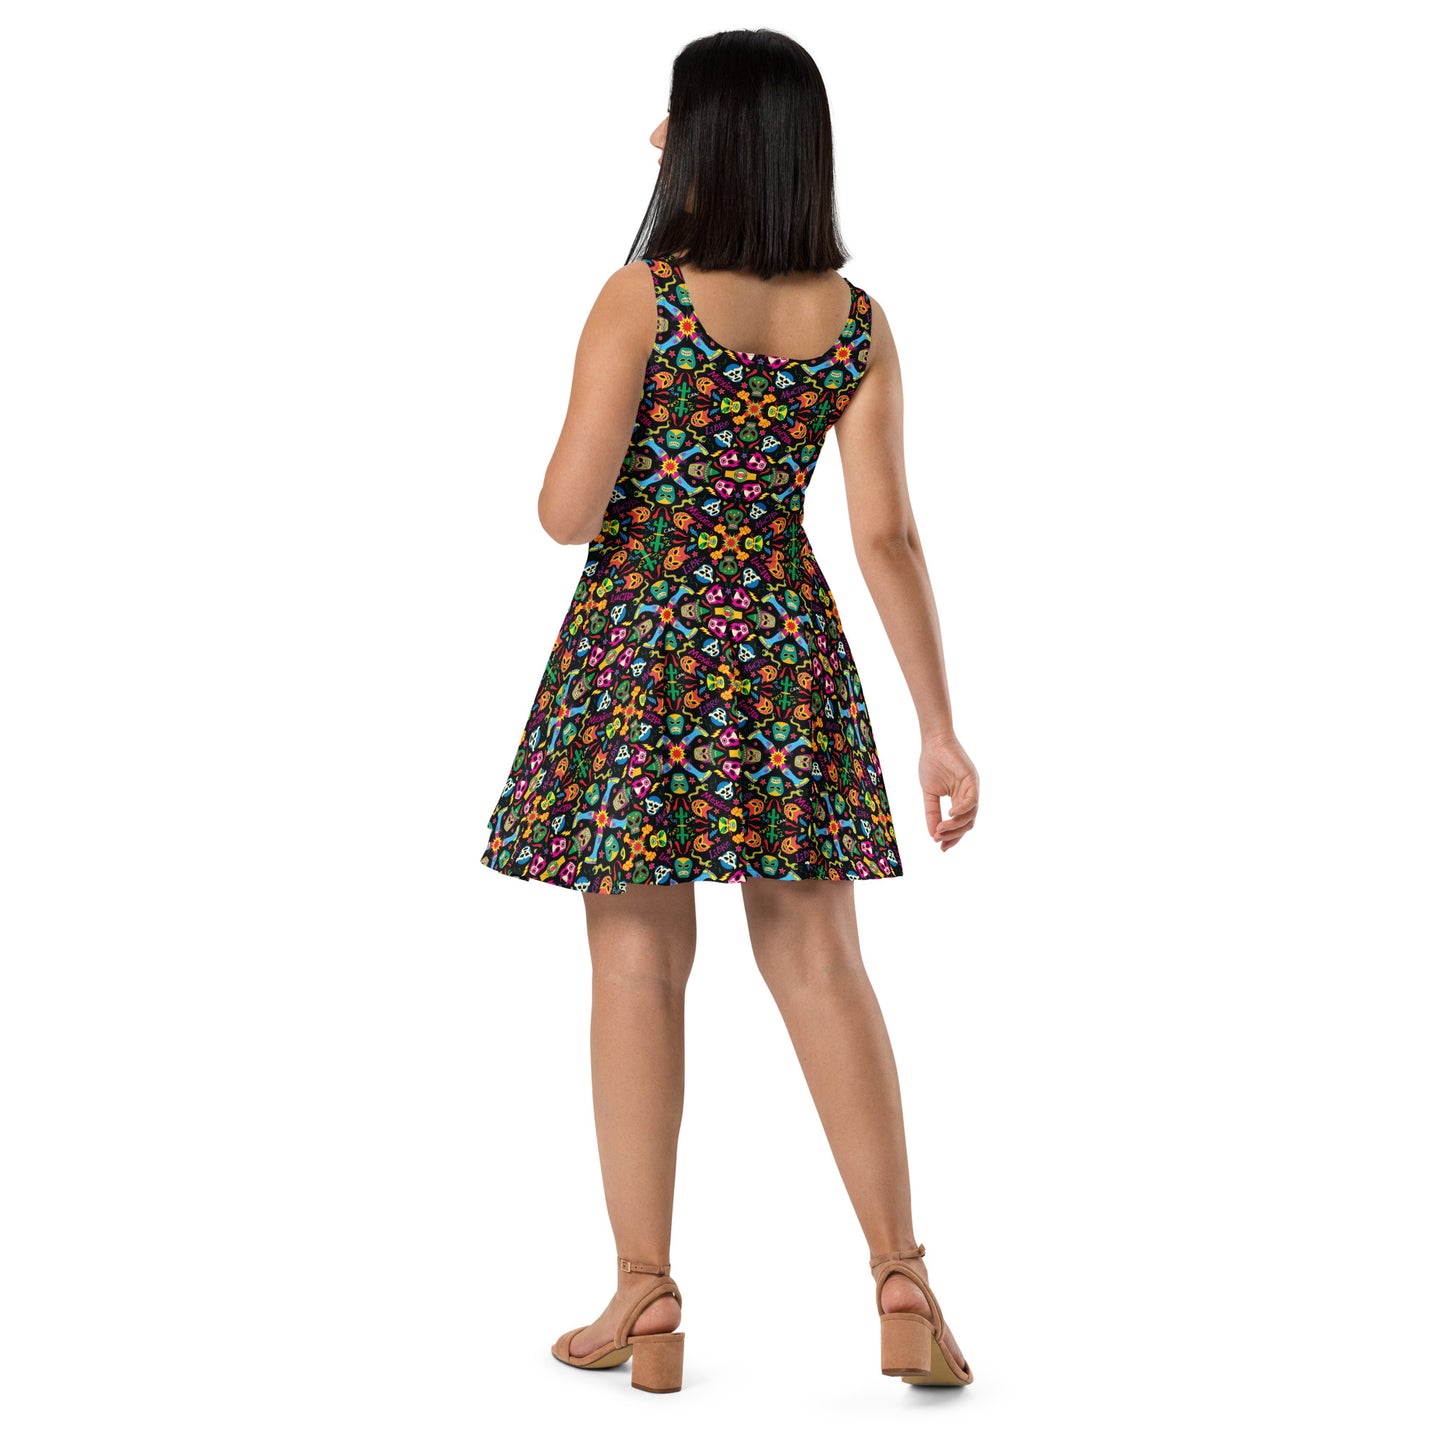 Mexican wrestling colorful party Skater Dress. Back view